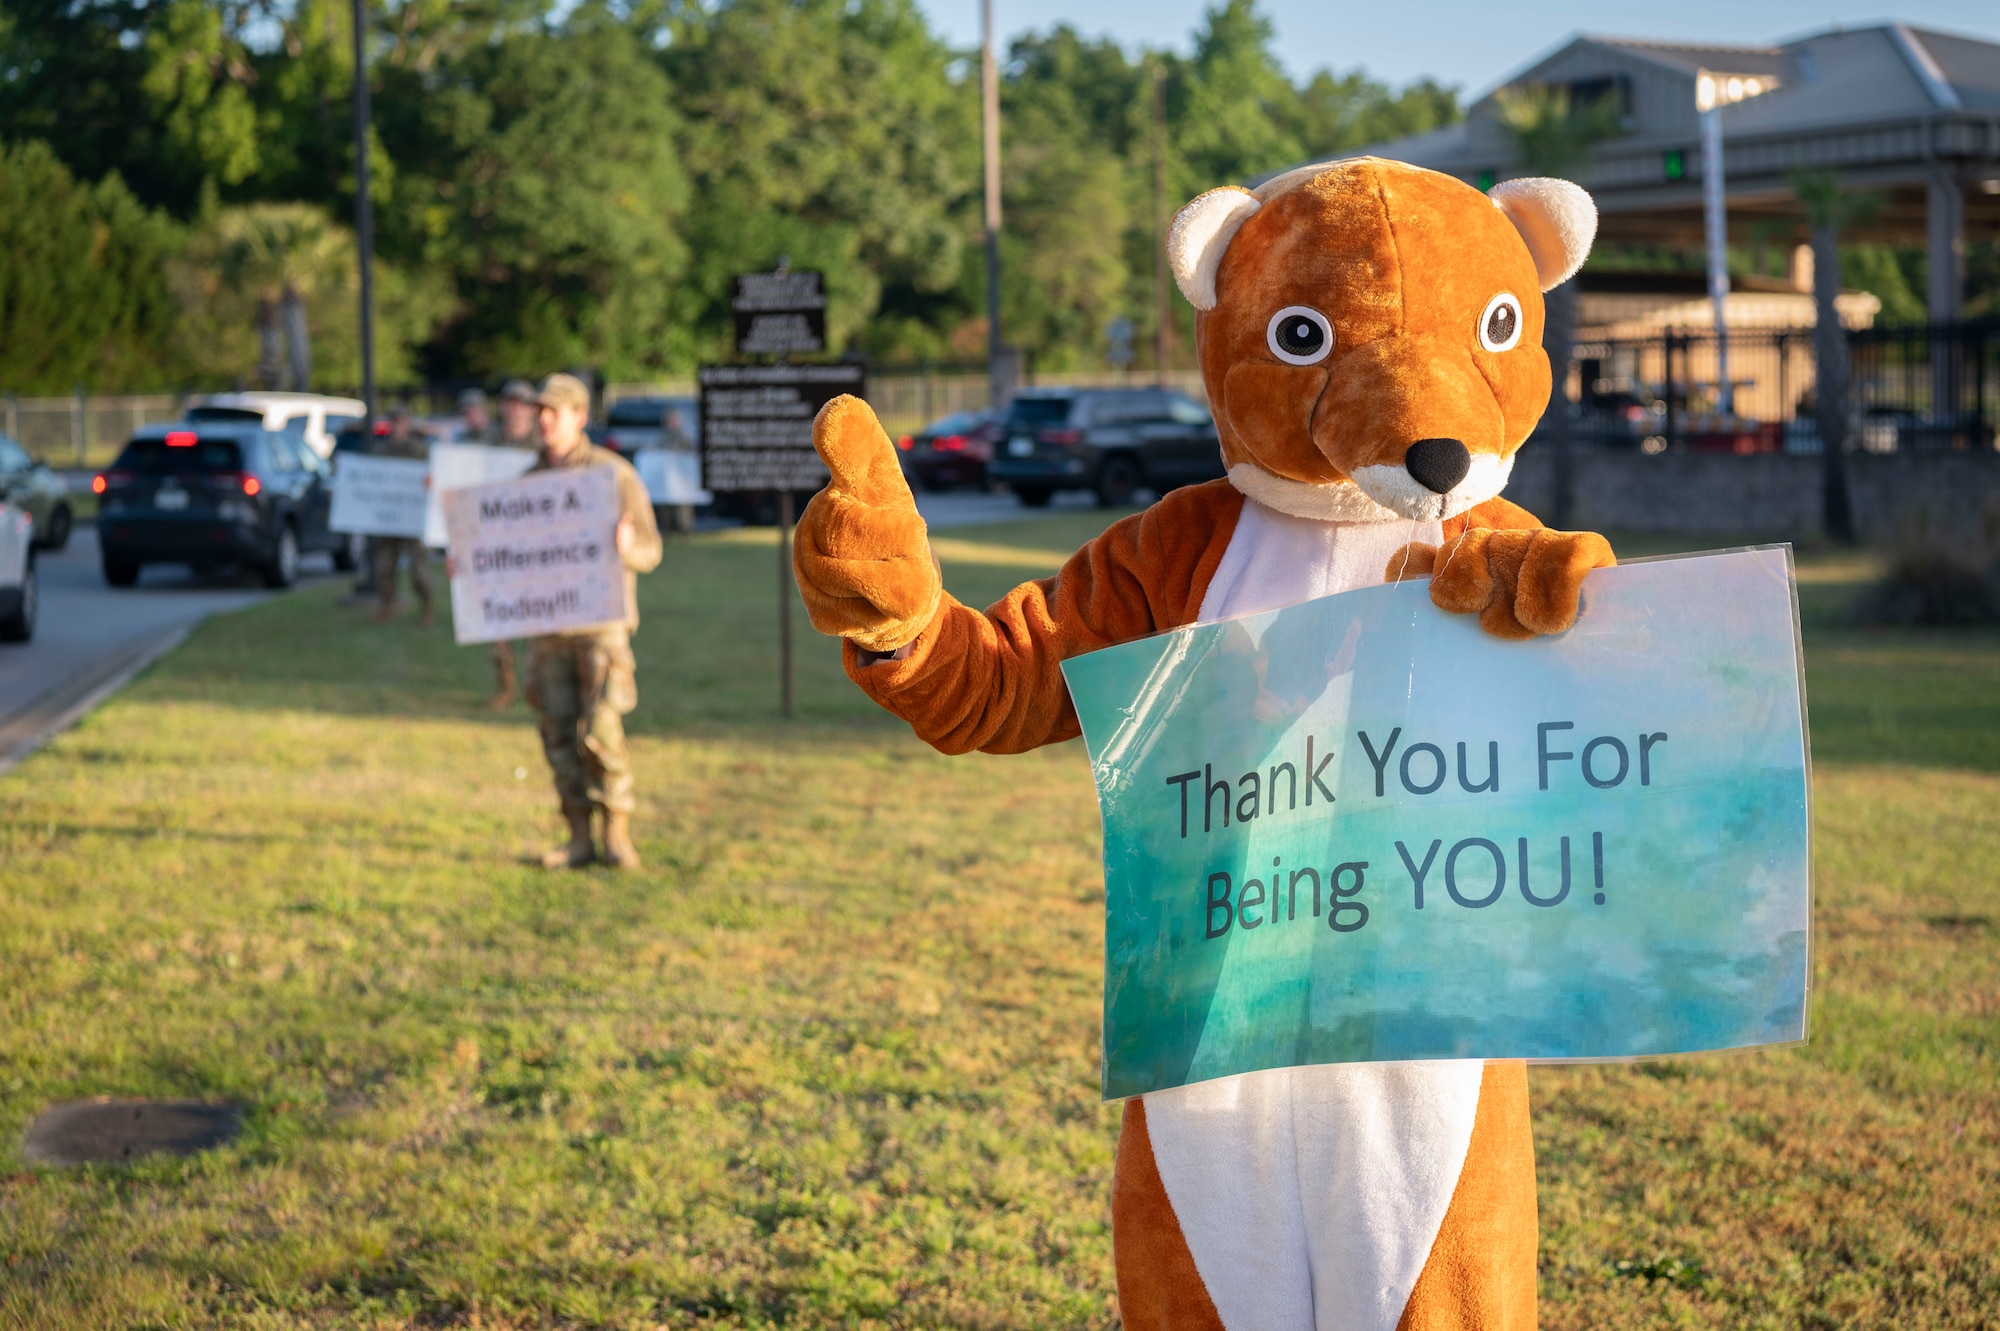 A U.S. Airman wears a Shaw Weasel costume to contribute to the Inspire Shaw campaign at Shaw Air Force Base, S.C., May 1, 2023. The Inspire Shaw is intended to remind Airmen of how they enable the combat mission and their value to Team Shaw. (U.S. Air Force photo by Senior Airman Isaac Nicholson)